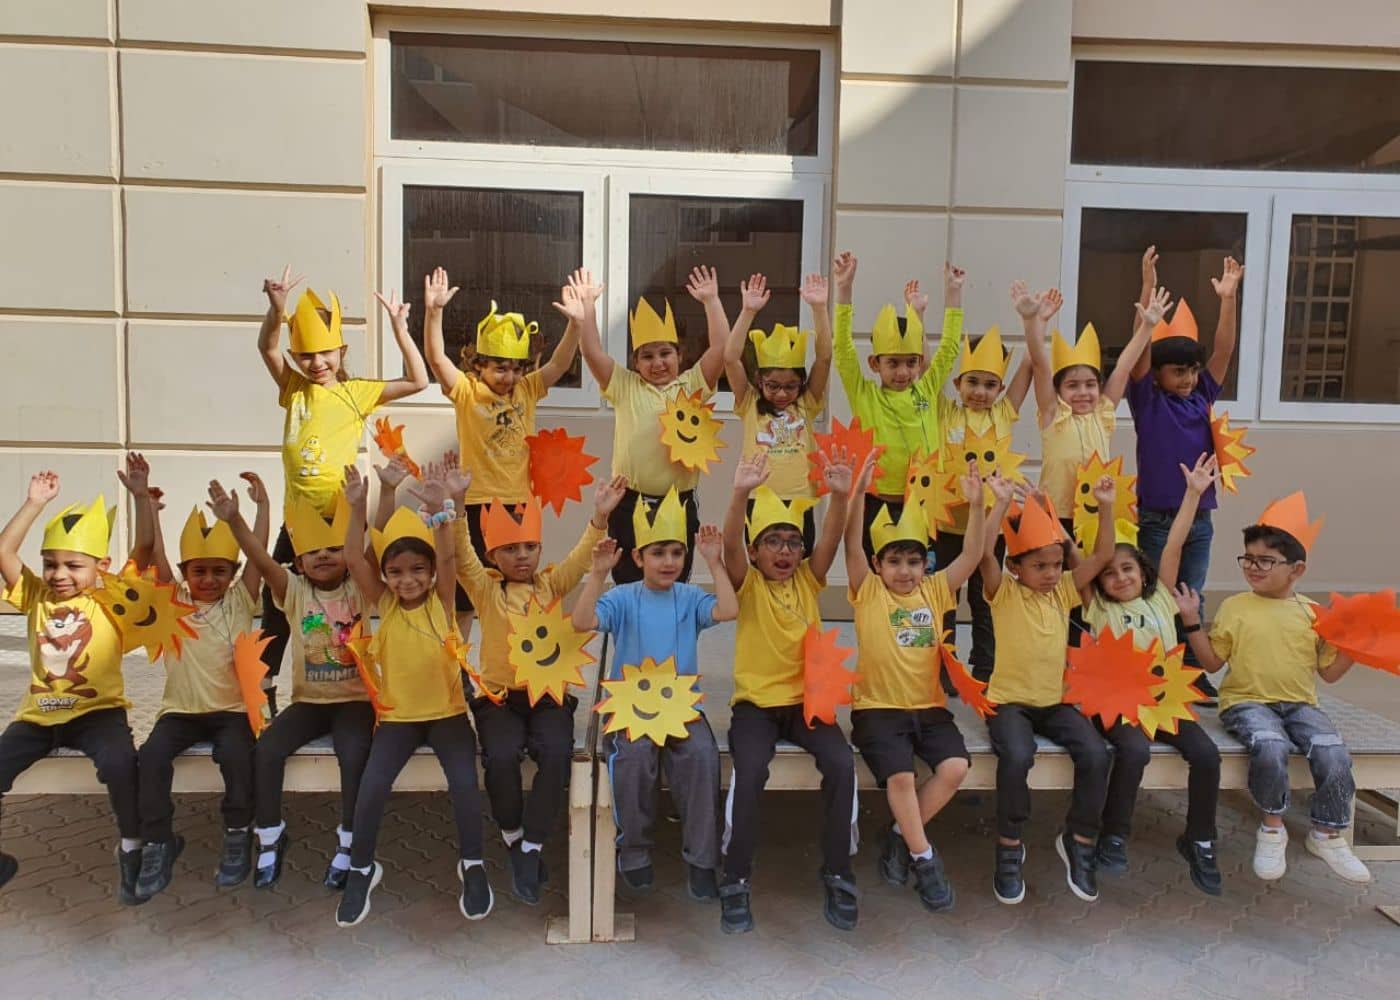 Prep students of Abu Dhabi International School at the Sun Day event